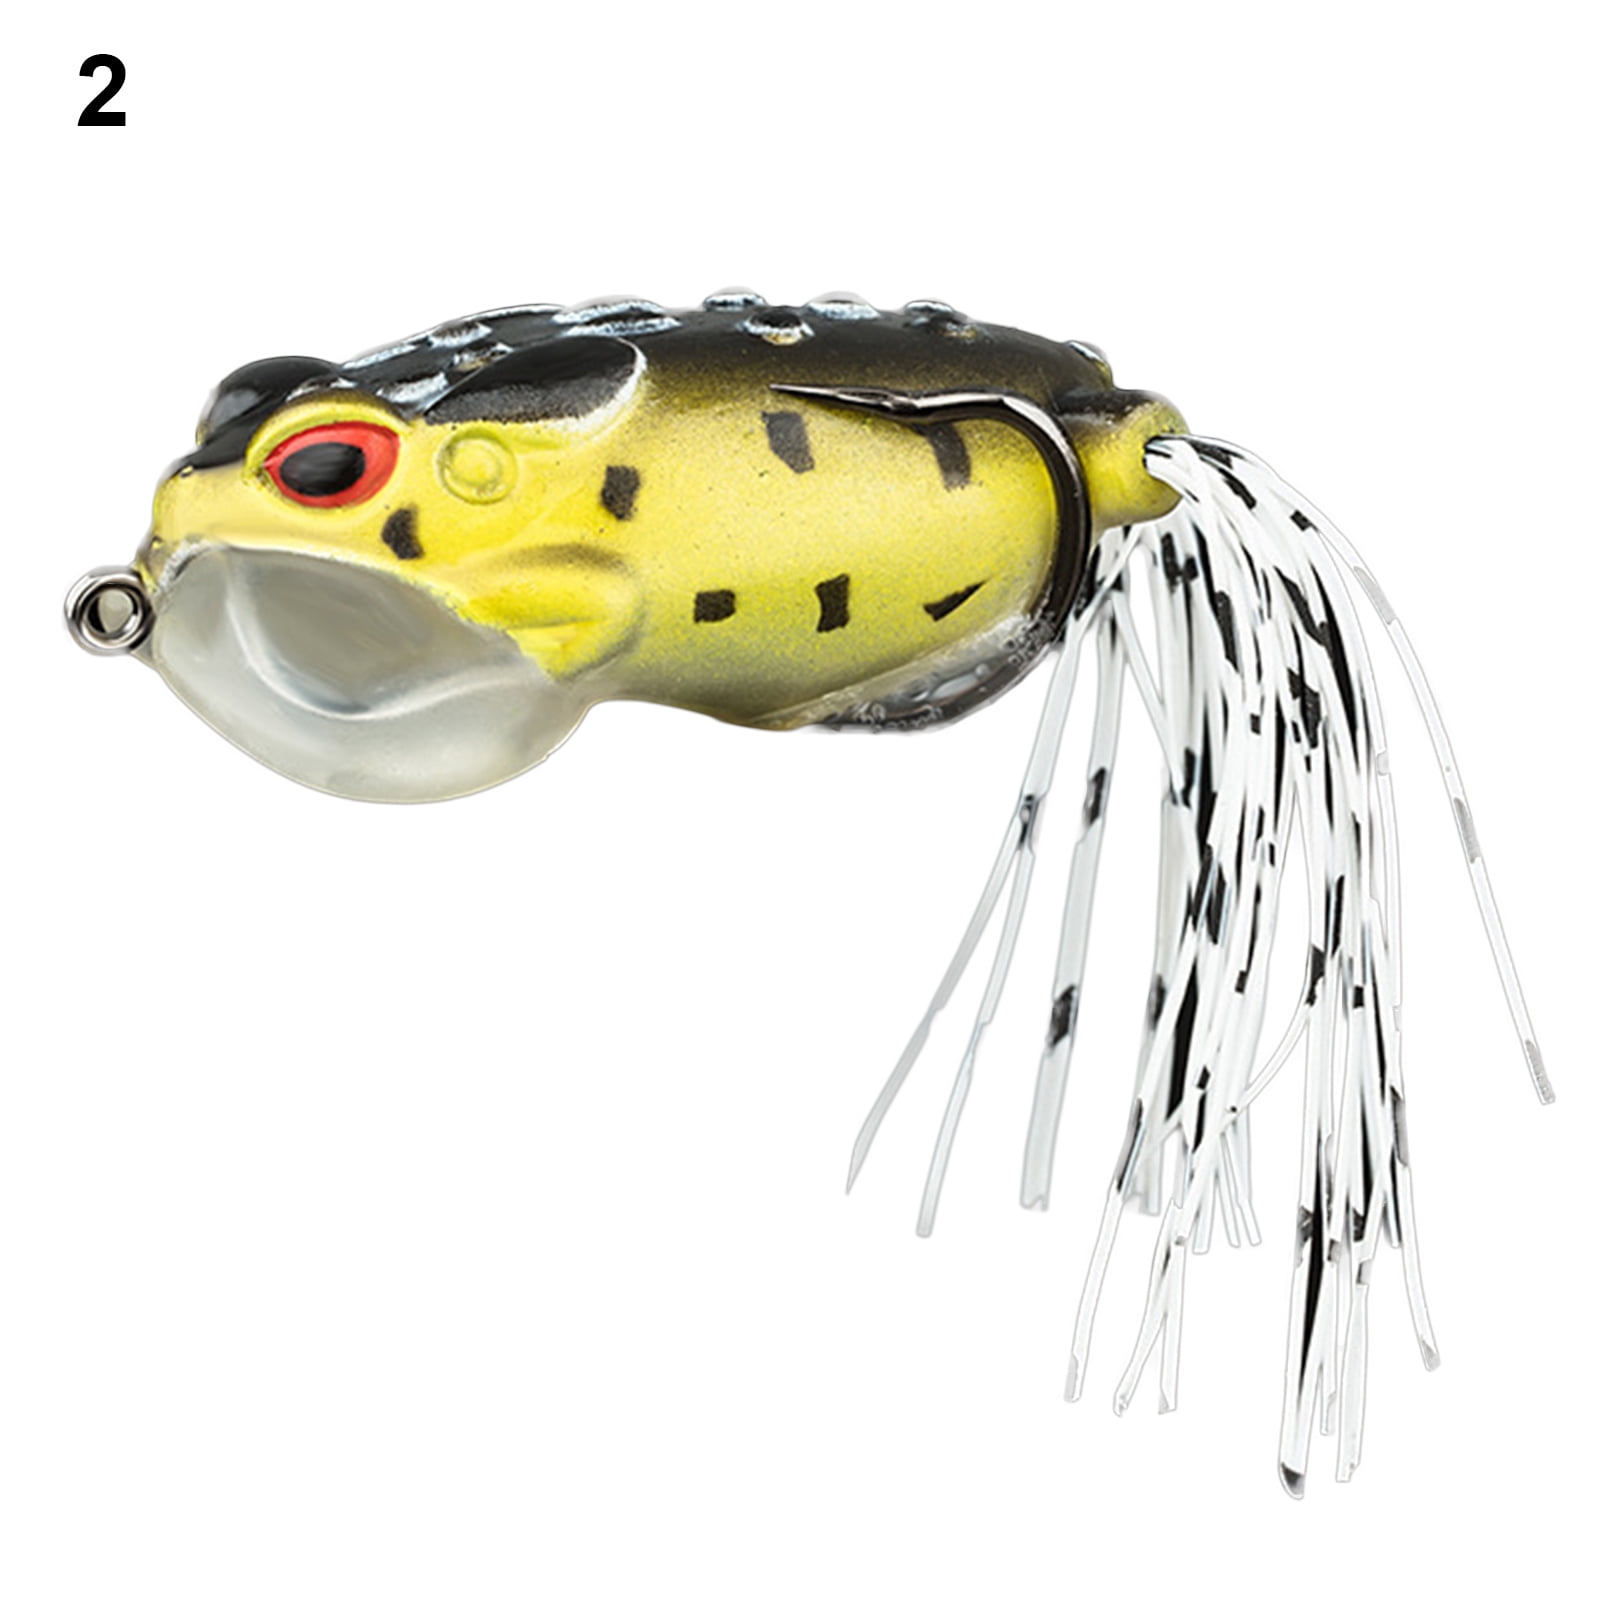 15g 6cm Frog Fishing Lure Pesca Iscas Artificiais Peche Leurre soft tube  bait Hook plastic fishing lures frog Topwater ray